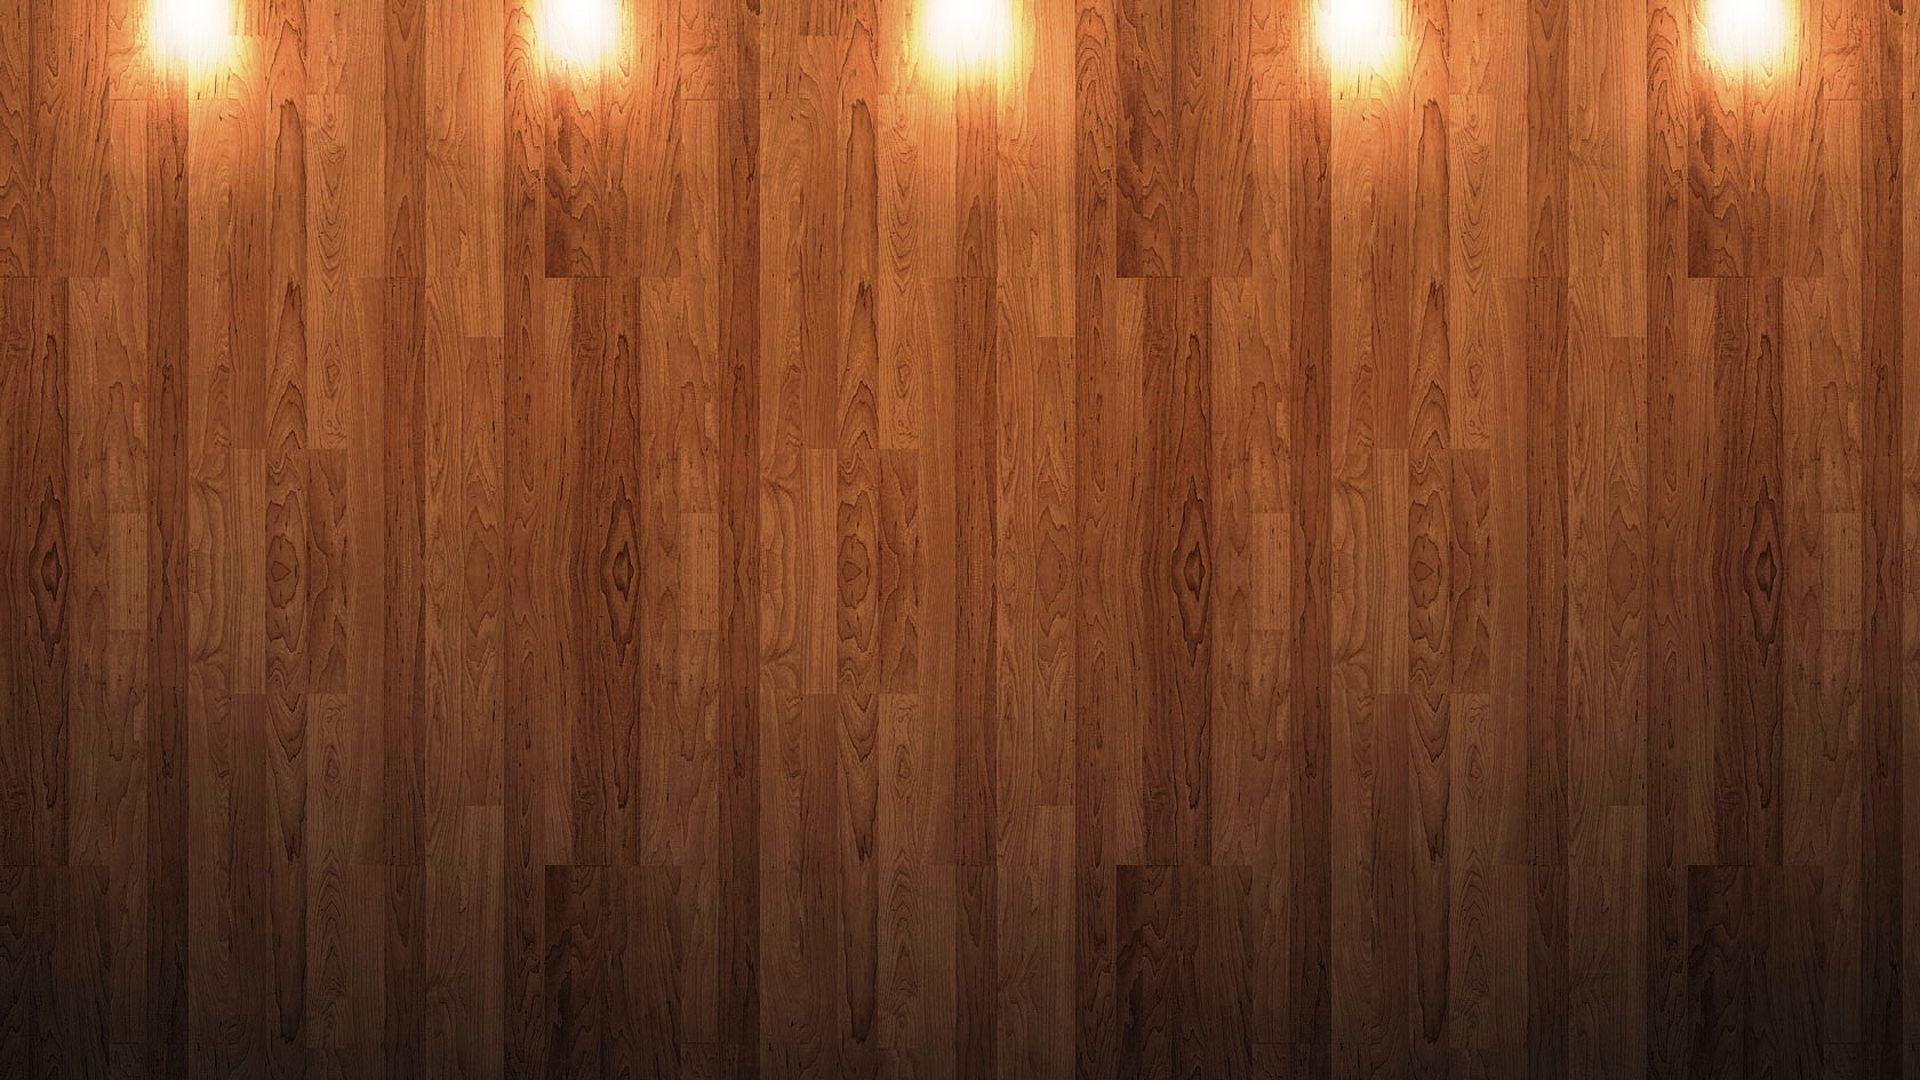 Wood Texture Background Images HD Pictures For Free Vectors Download   Lovepikcom